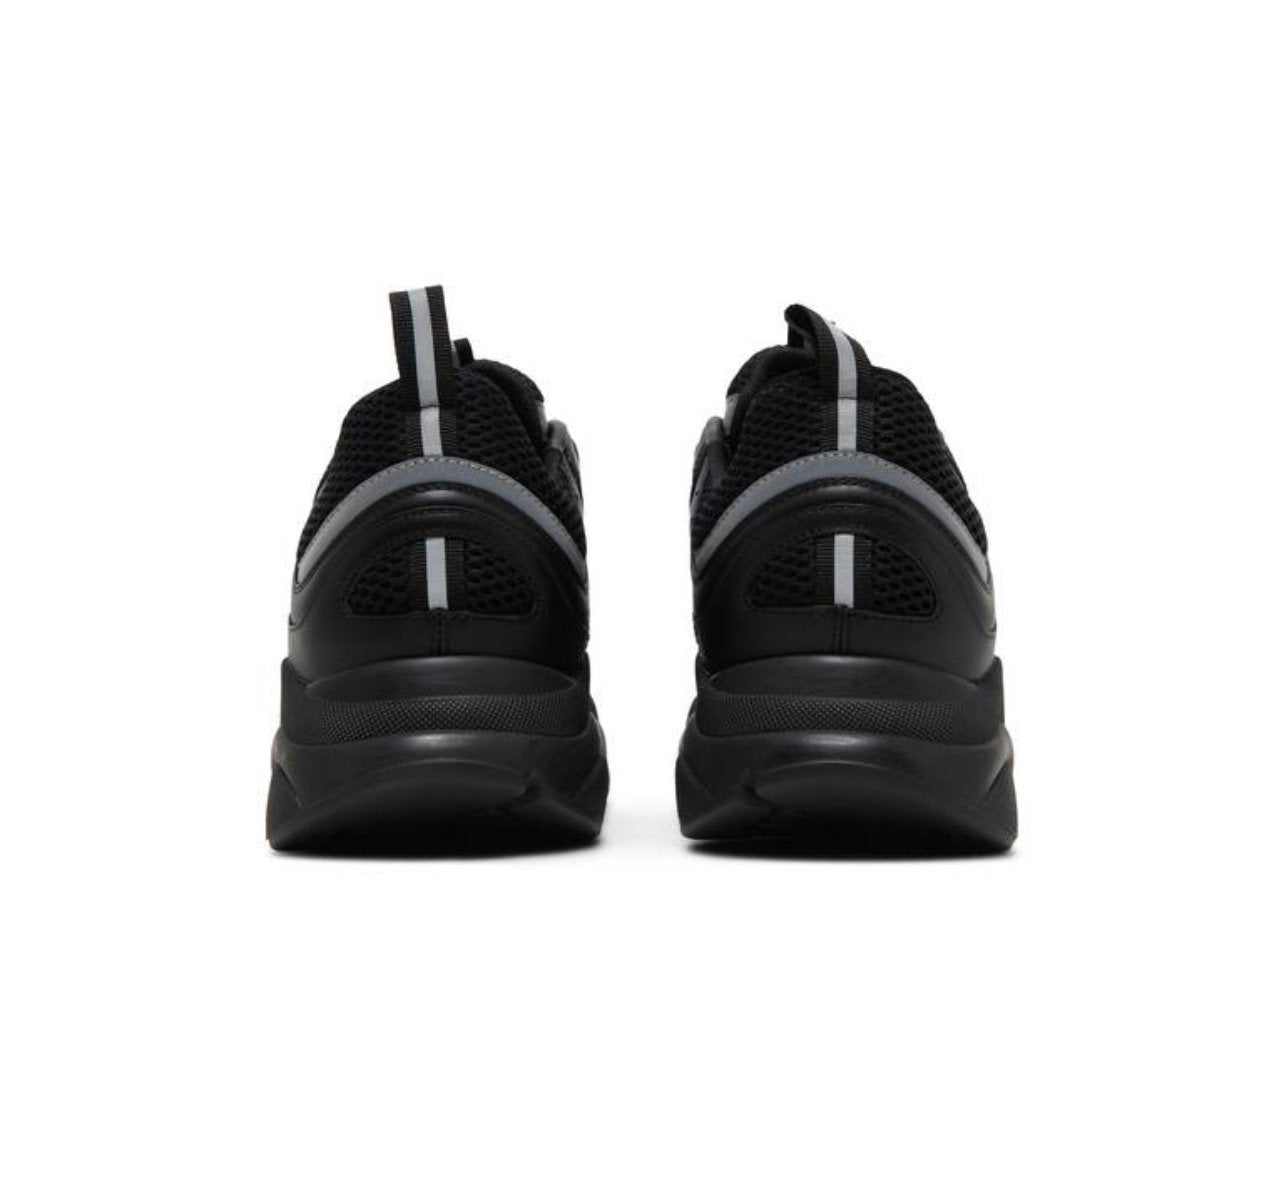 DIOR HOMME B22 BLACK TECHNICAL KNIT 3M REFLECTIVE